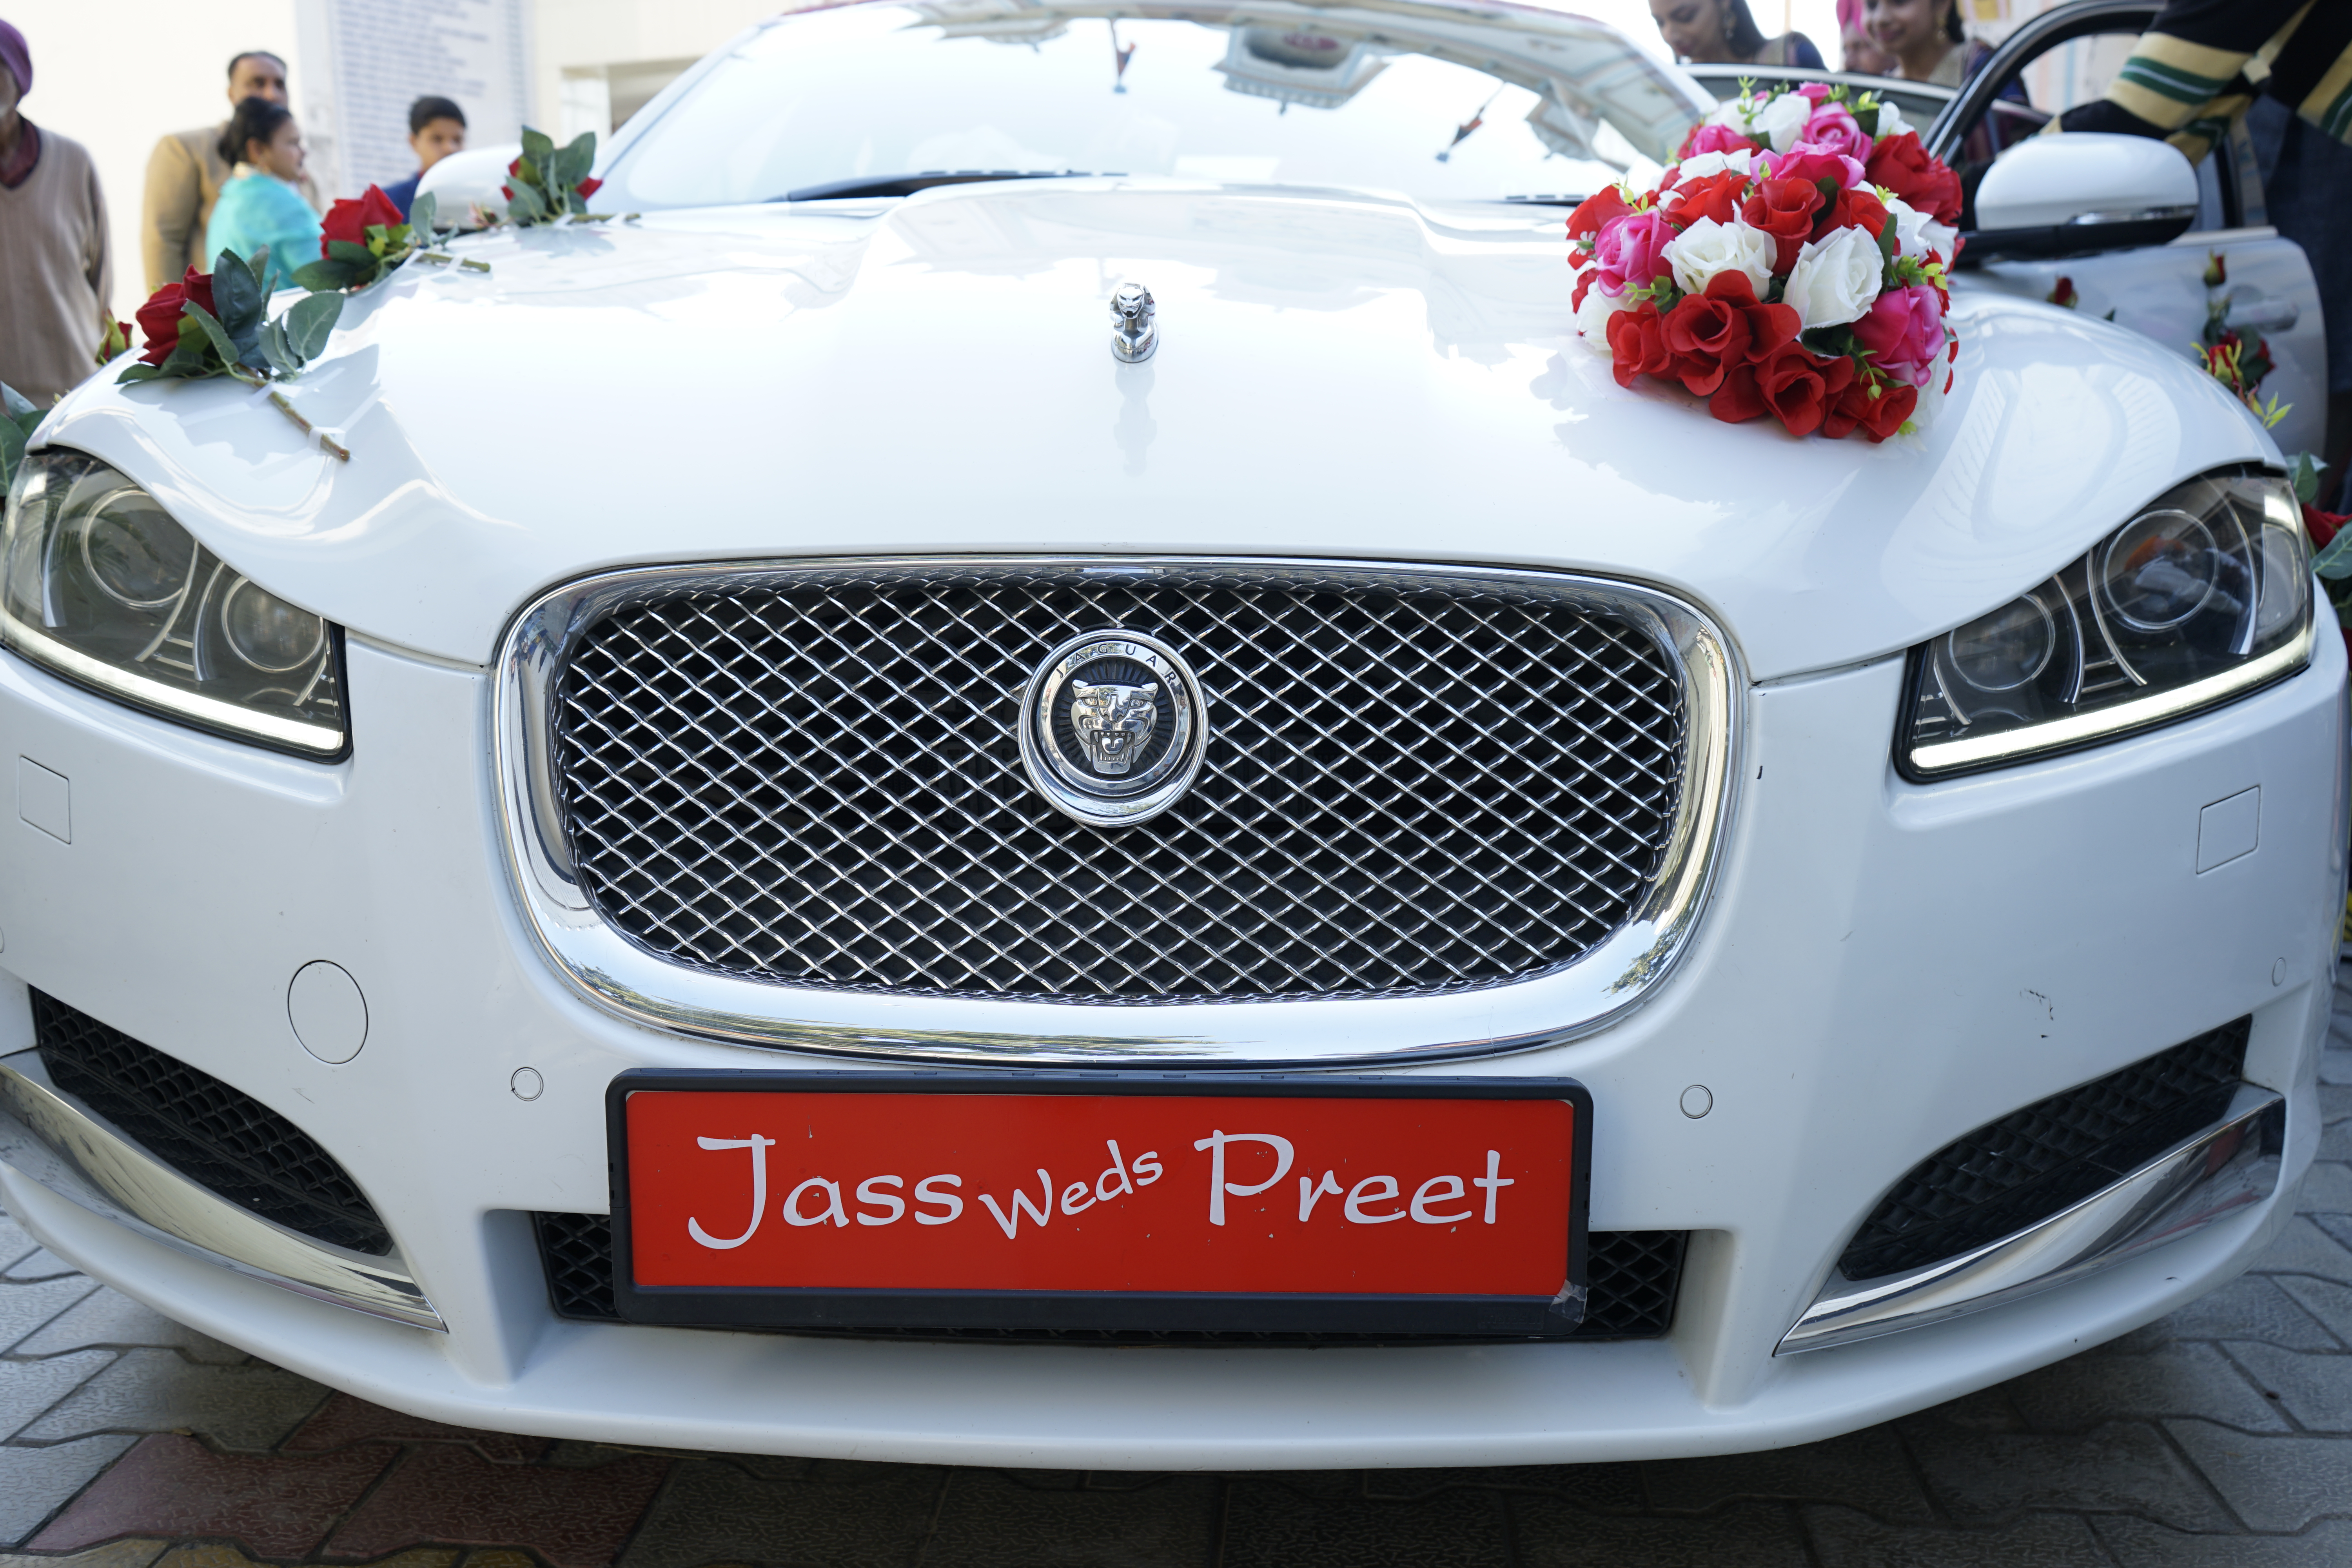 JUST MARRIED Jass Weds Preet Jass Weds Preet for wedding rental in Punjab, India